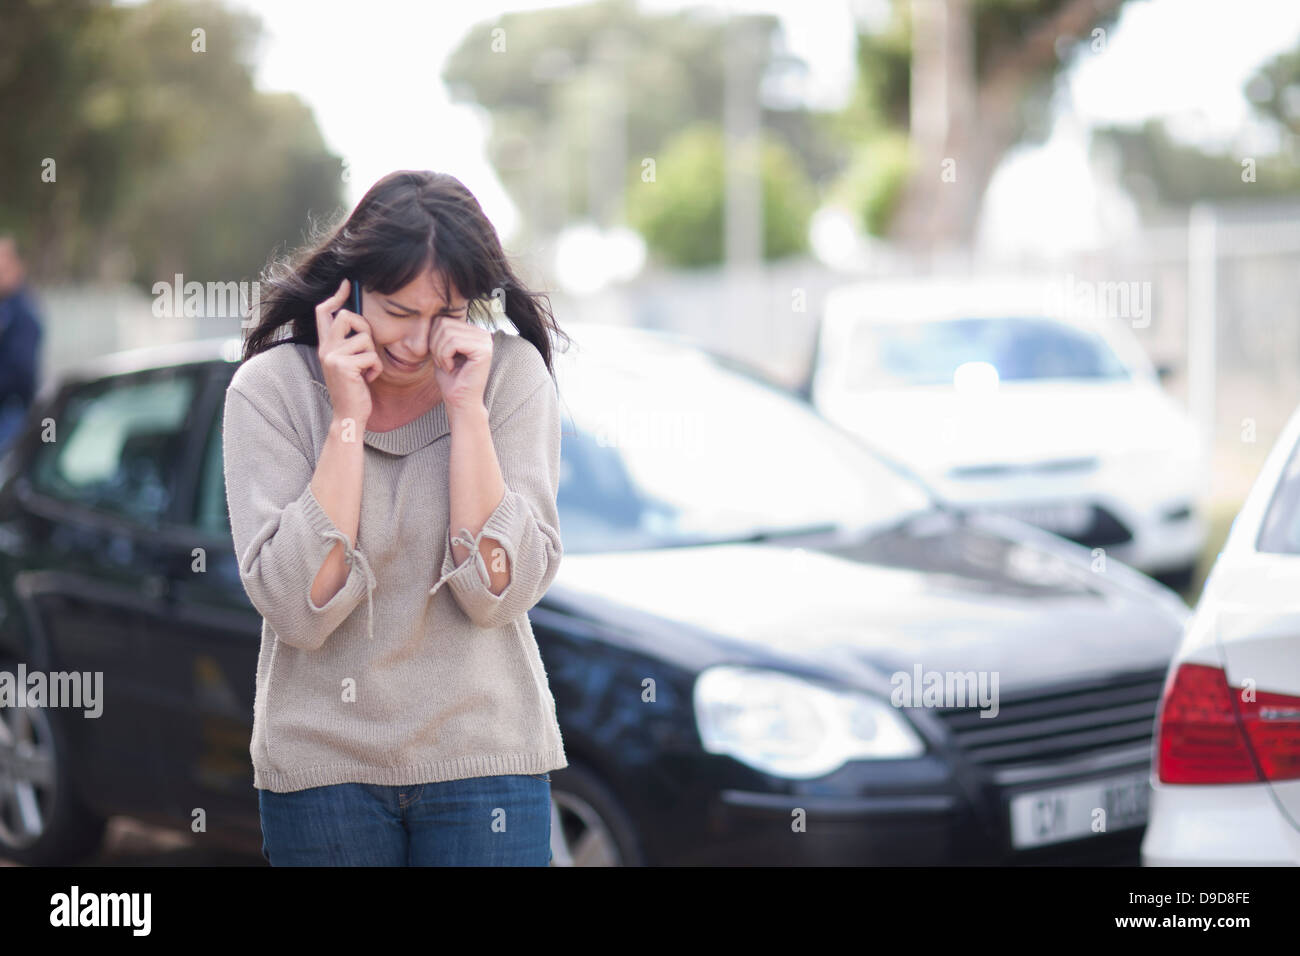 Woman crying after car accident Stock Photo